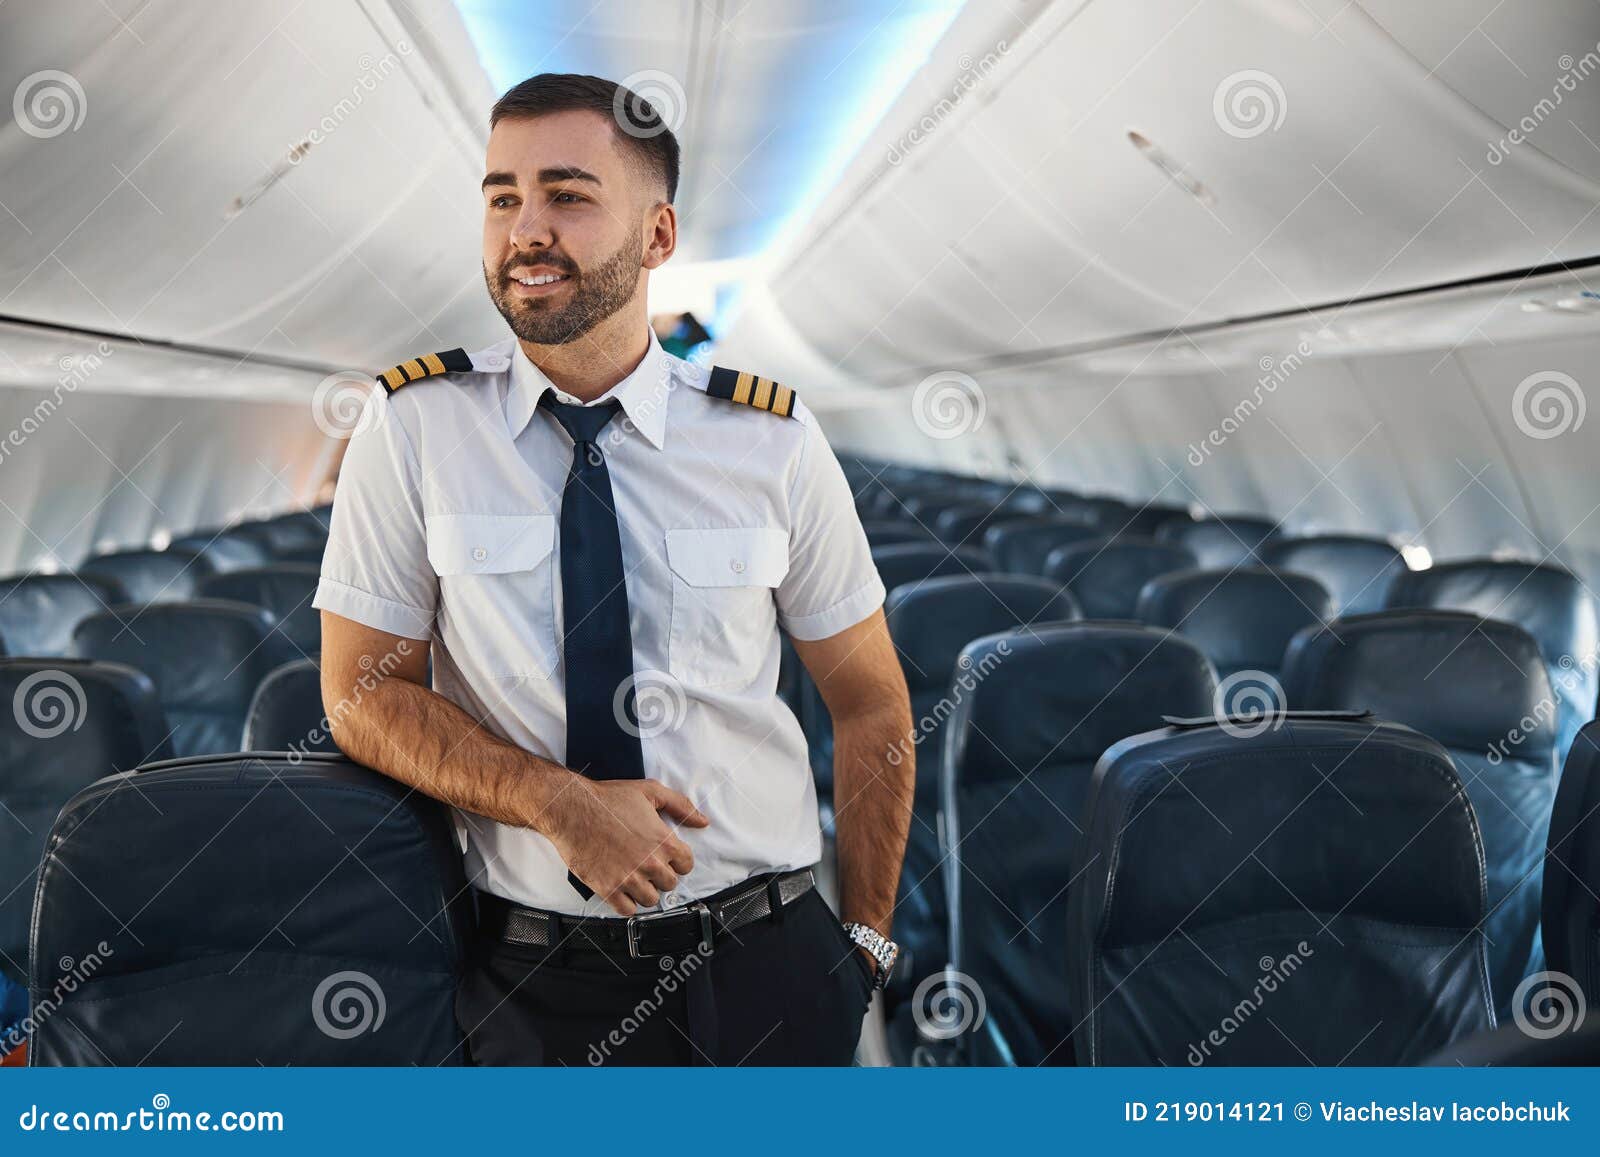 Handsome Contented Pilot Relaxing before the Flight Stock Image - Image ...